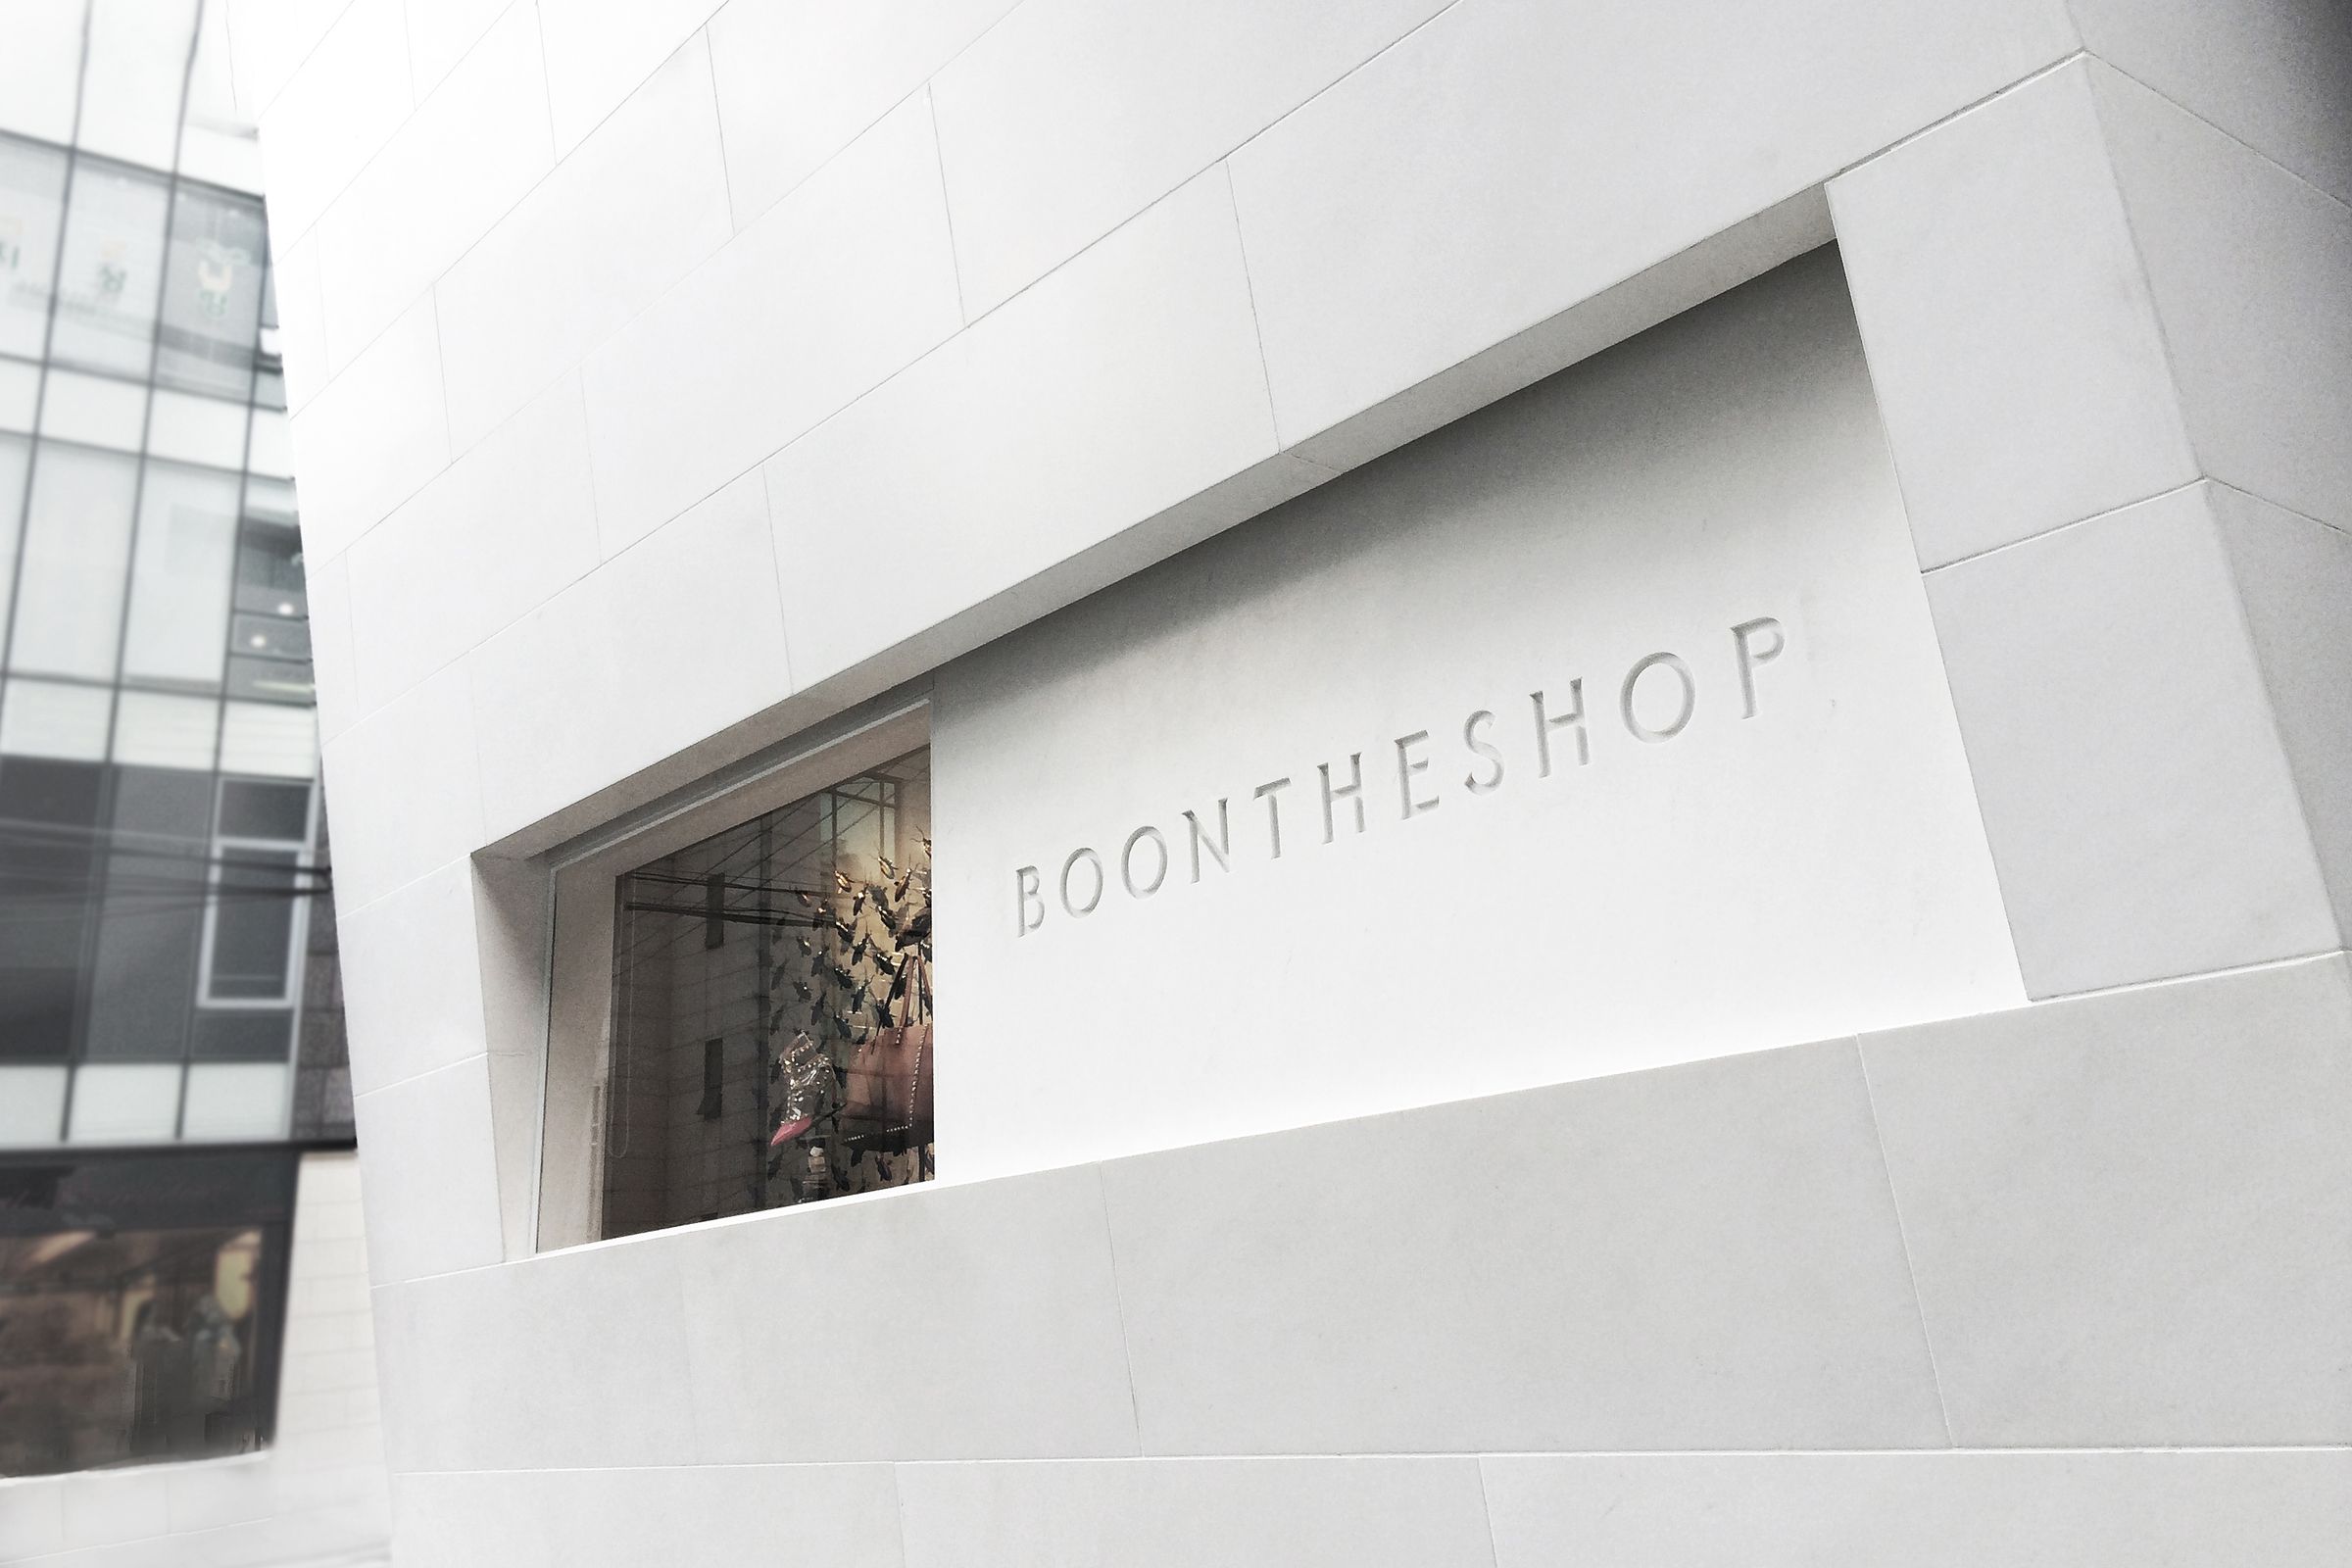 Gallery of Boontheshop / Peter Marino Architect - 3